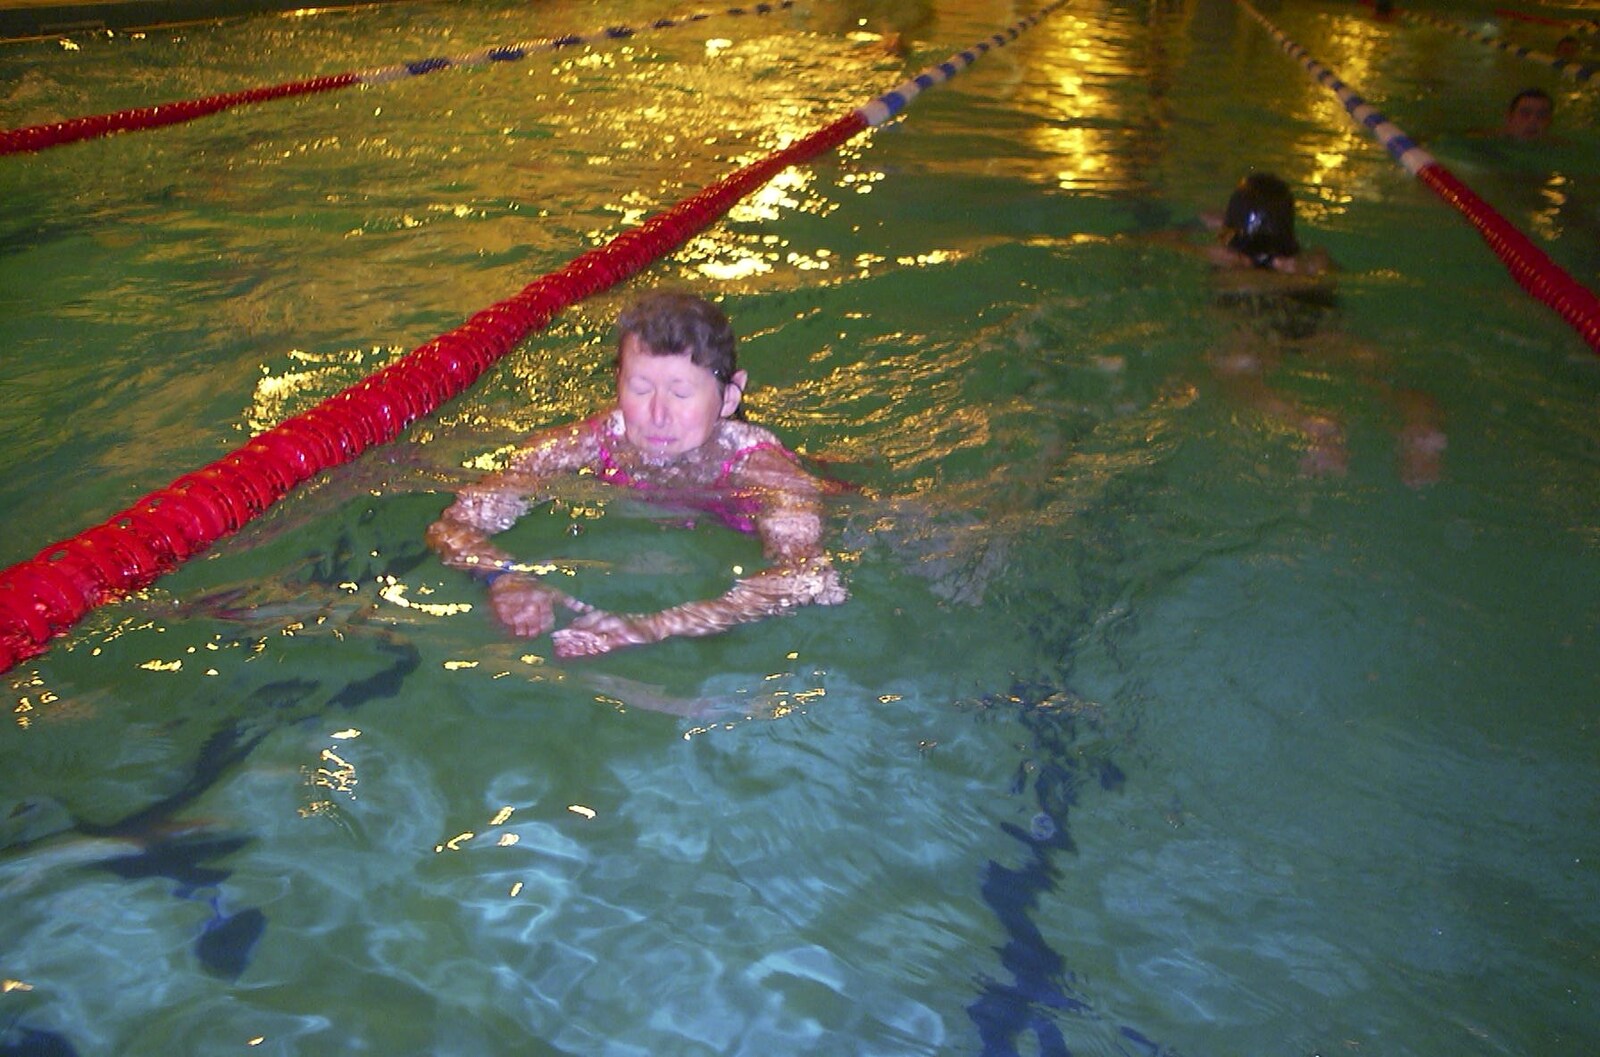 A Sponsored Swim, House Repairs and CISU at the Social Club, Brome, Diss and Ipswich - 5th October 2003: Sylvia with eyes closed